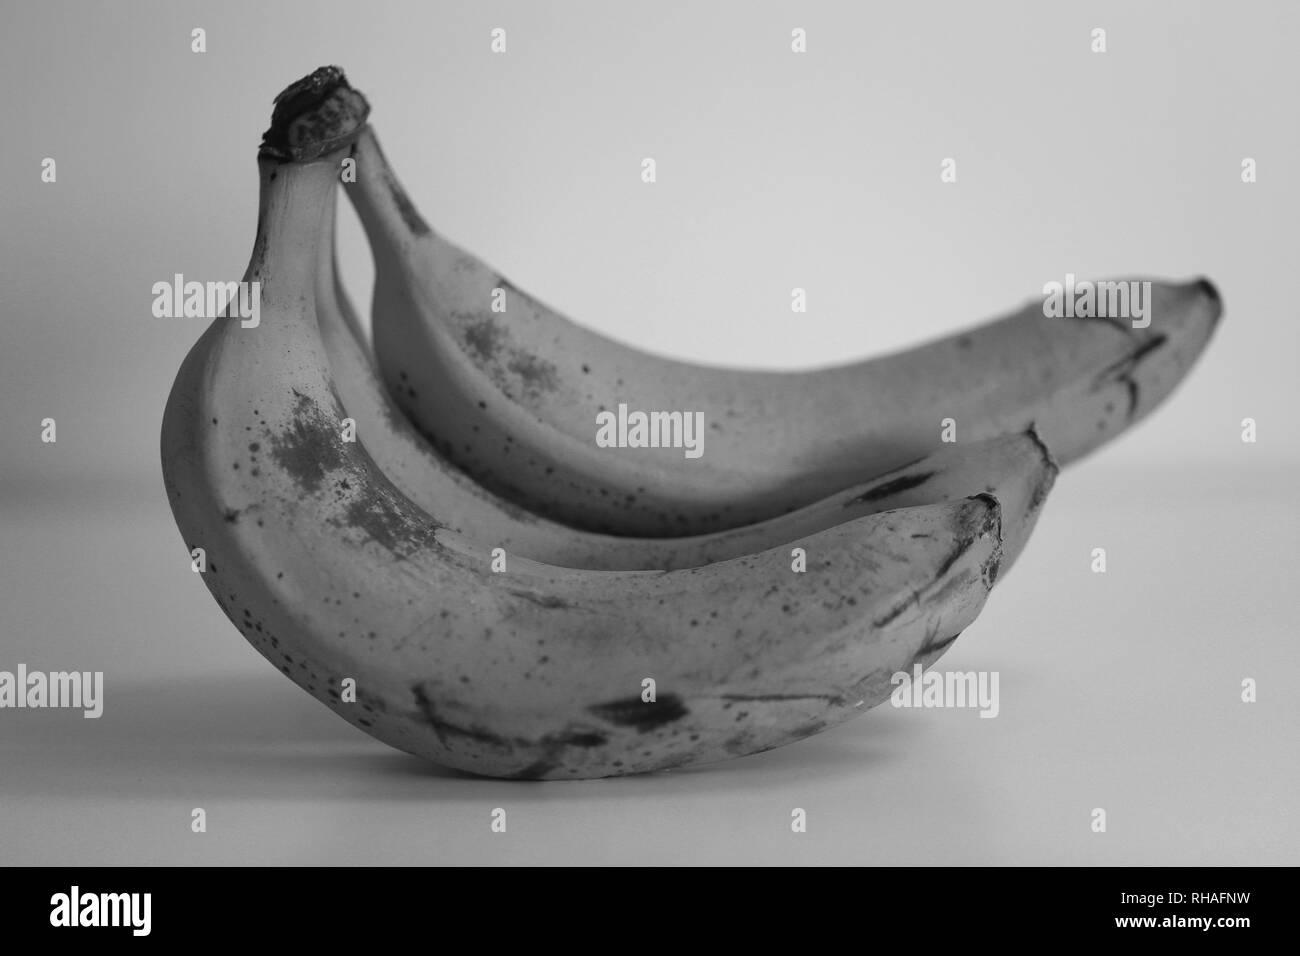 Closeup photo of bananas. Taken with macro objective to show all the smallest details. The bananas are very ripe. Beautiful black & white image. Stock Photo